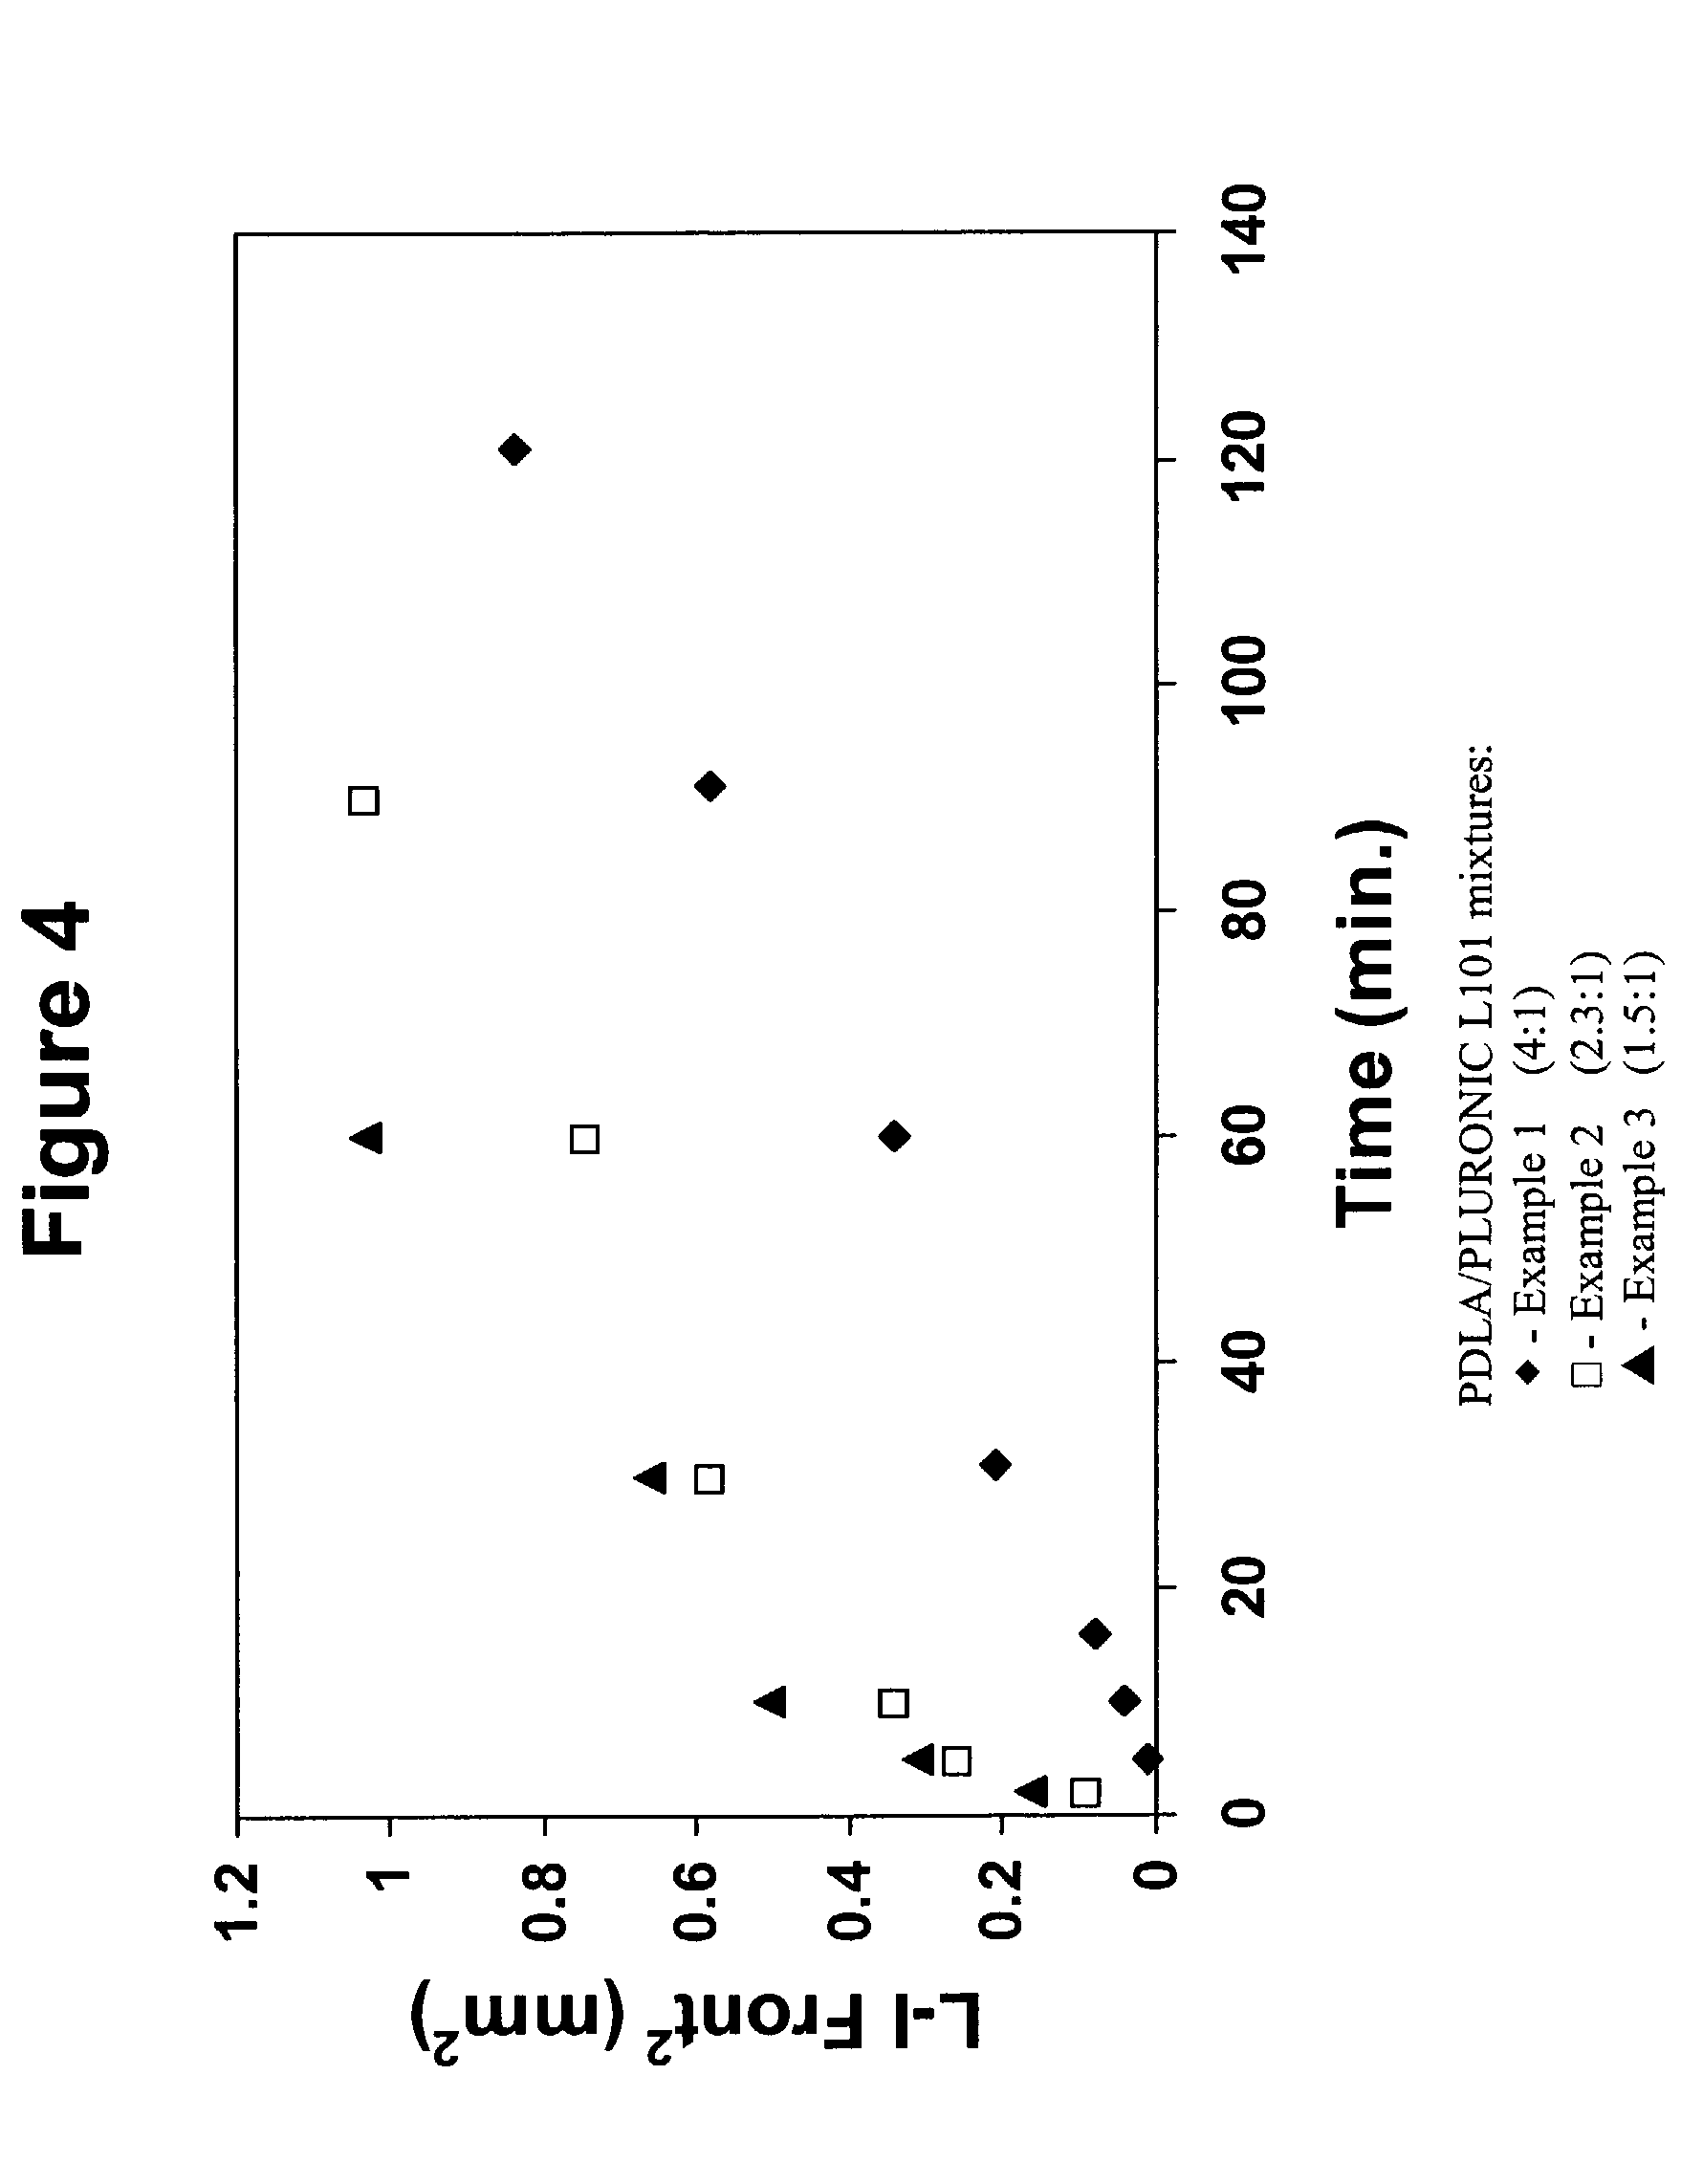 Injectable system for controlled drug delivery